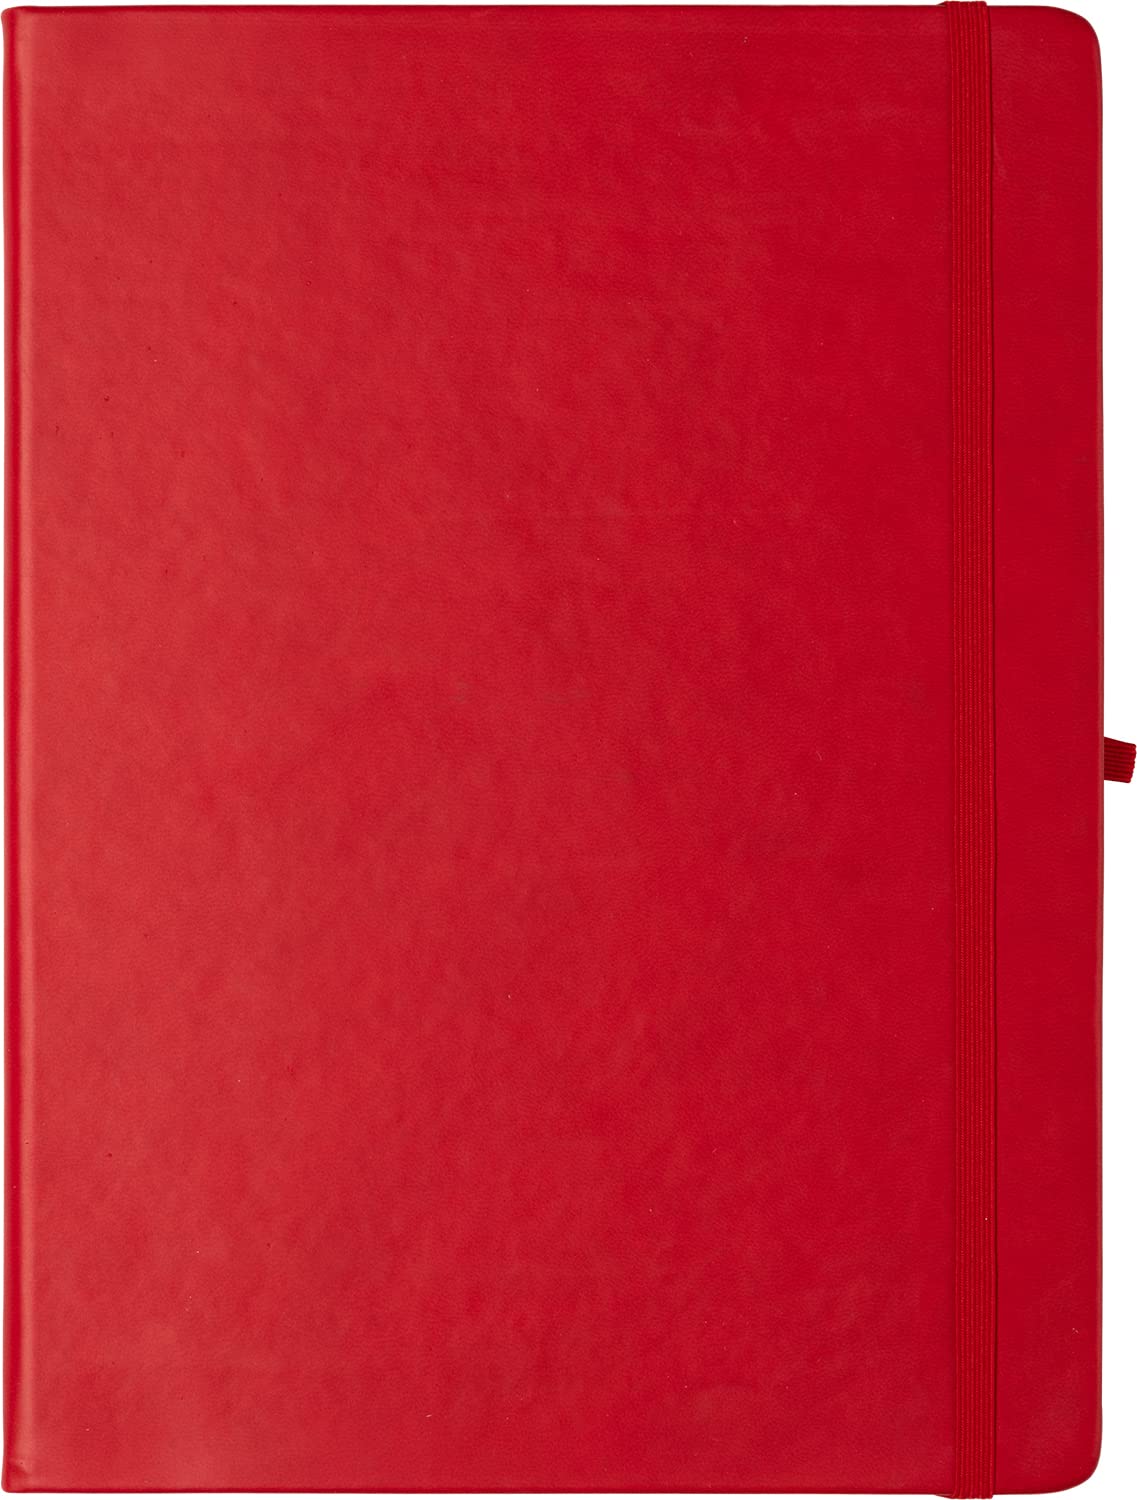 Eccolo Hardbound Writing Journal in Red